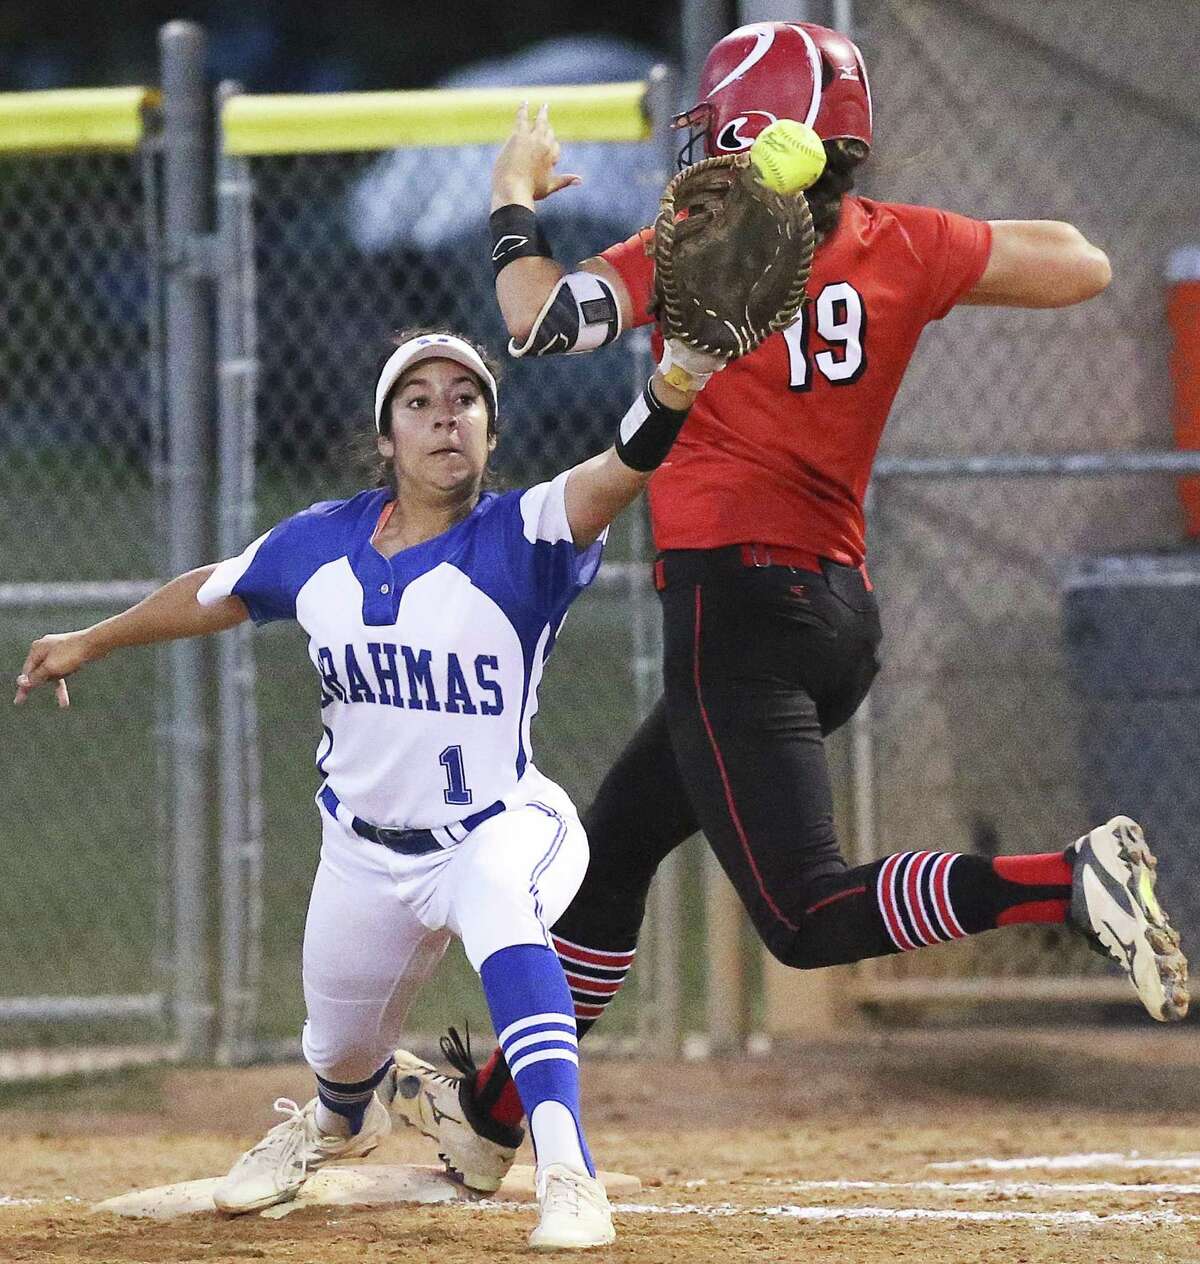 Brooke Vestal beats the throw to first as the Brahmas Kiersten Licea can't reach out far enough to make the out as Canyon plays MacArthur in clas 6A second round softball playoffs on May 5, 2017.